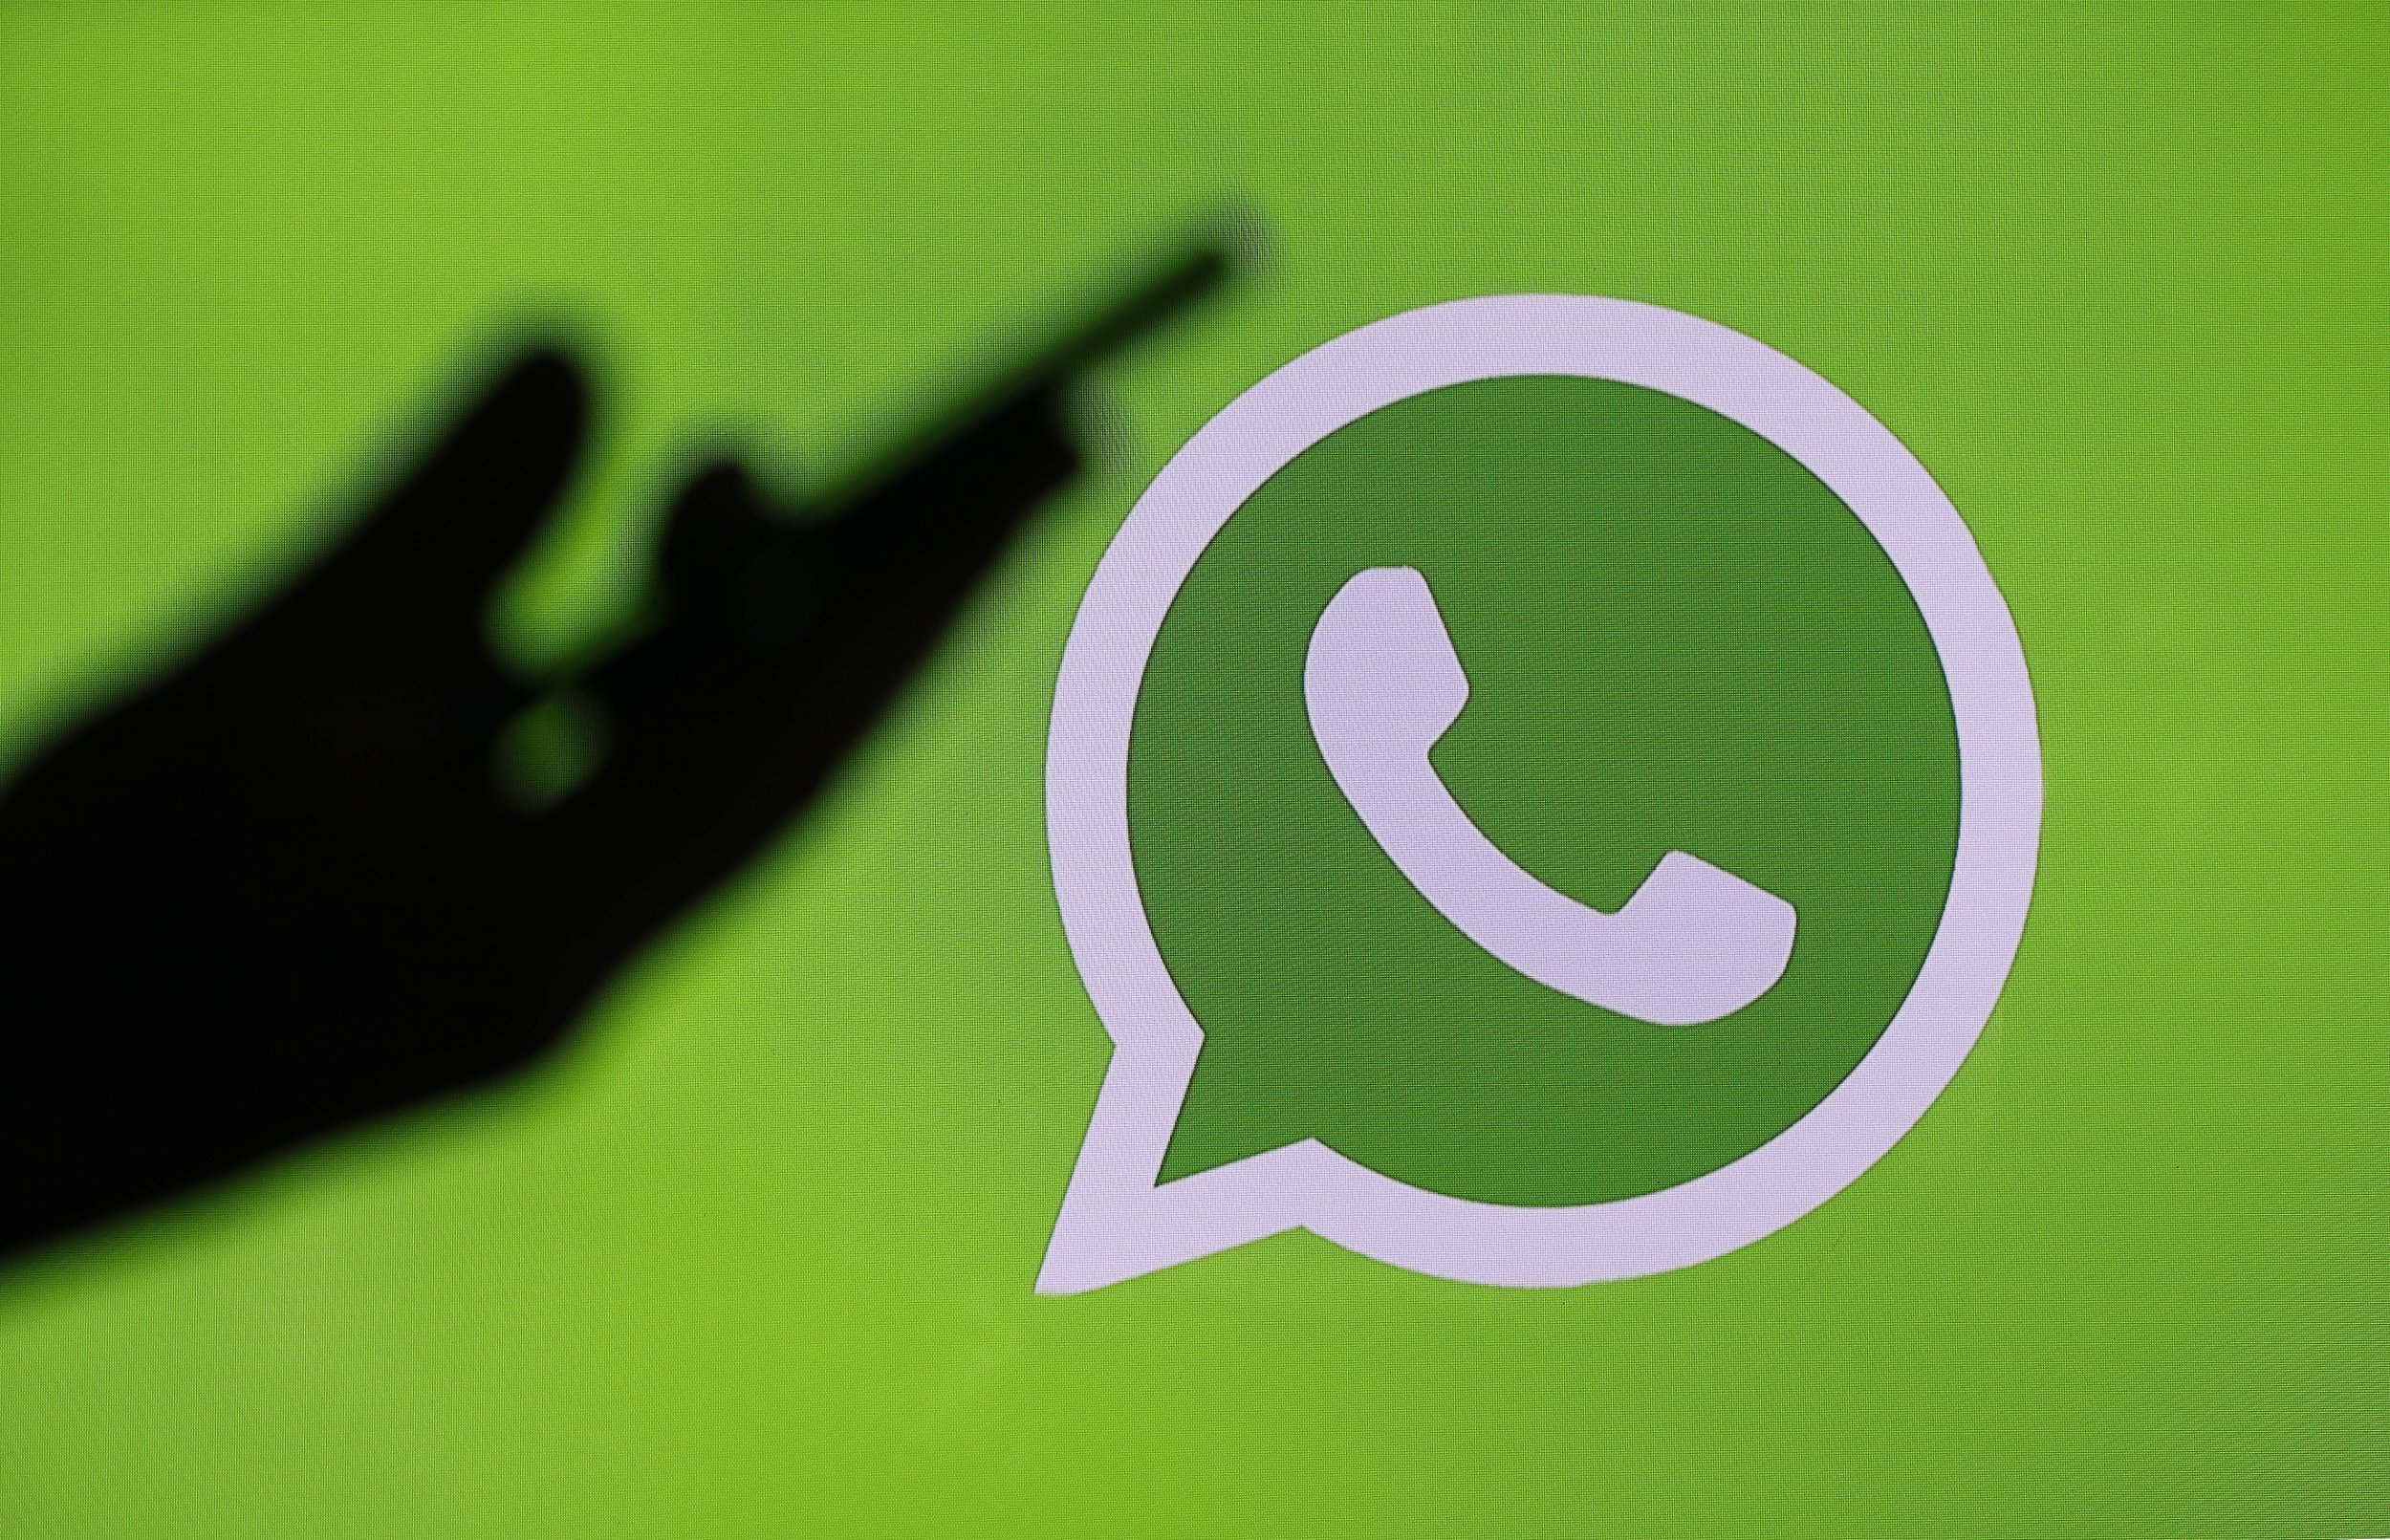 WhatsApp Hacked? How to Update App After Spying Malware Discovery